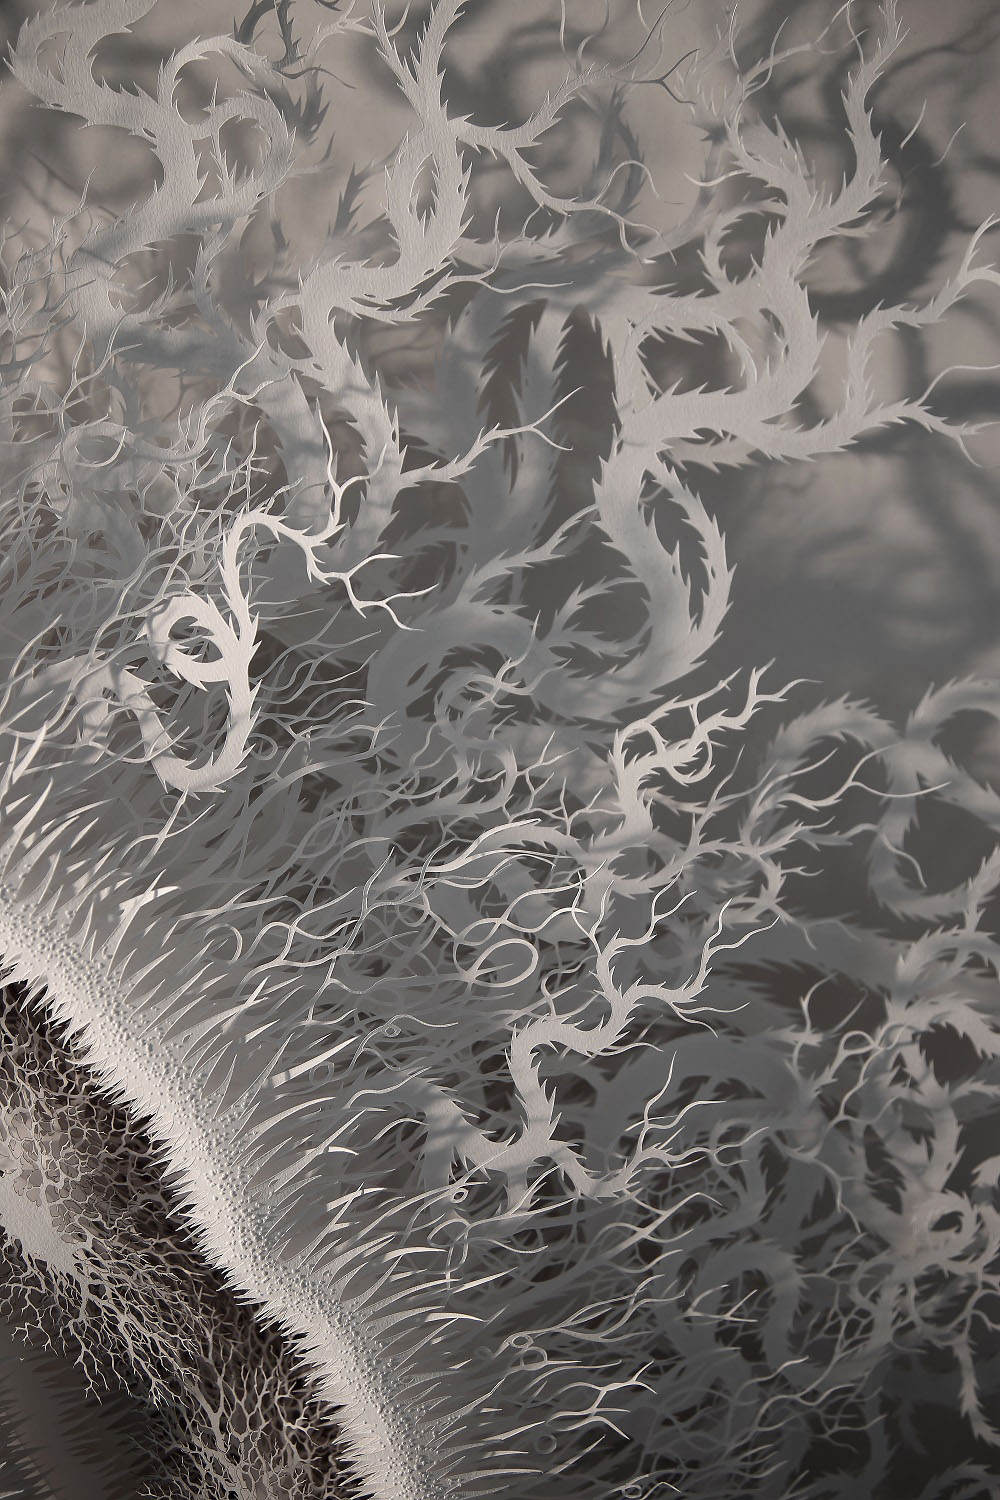 This Haunting Bacteria Is Actually An Intricate Hand-Cut Paper Sculpture